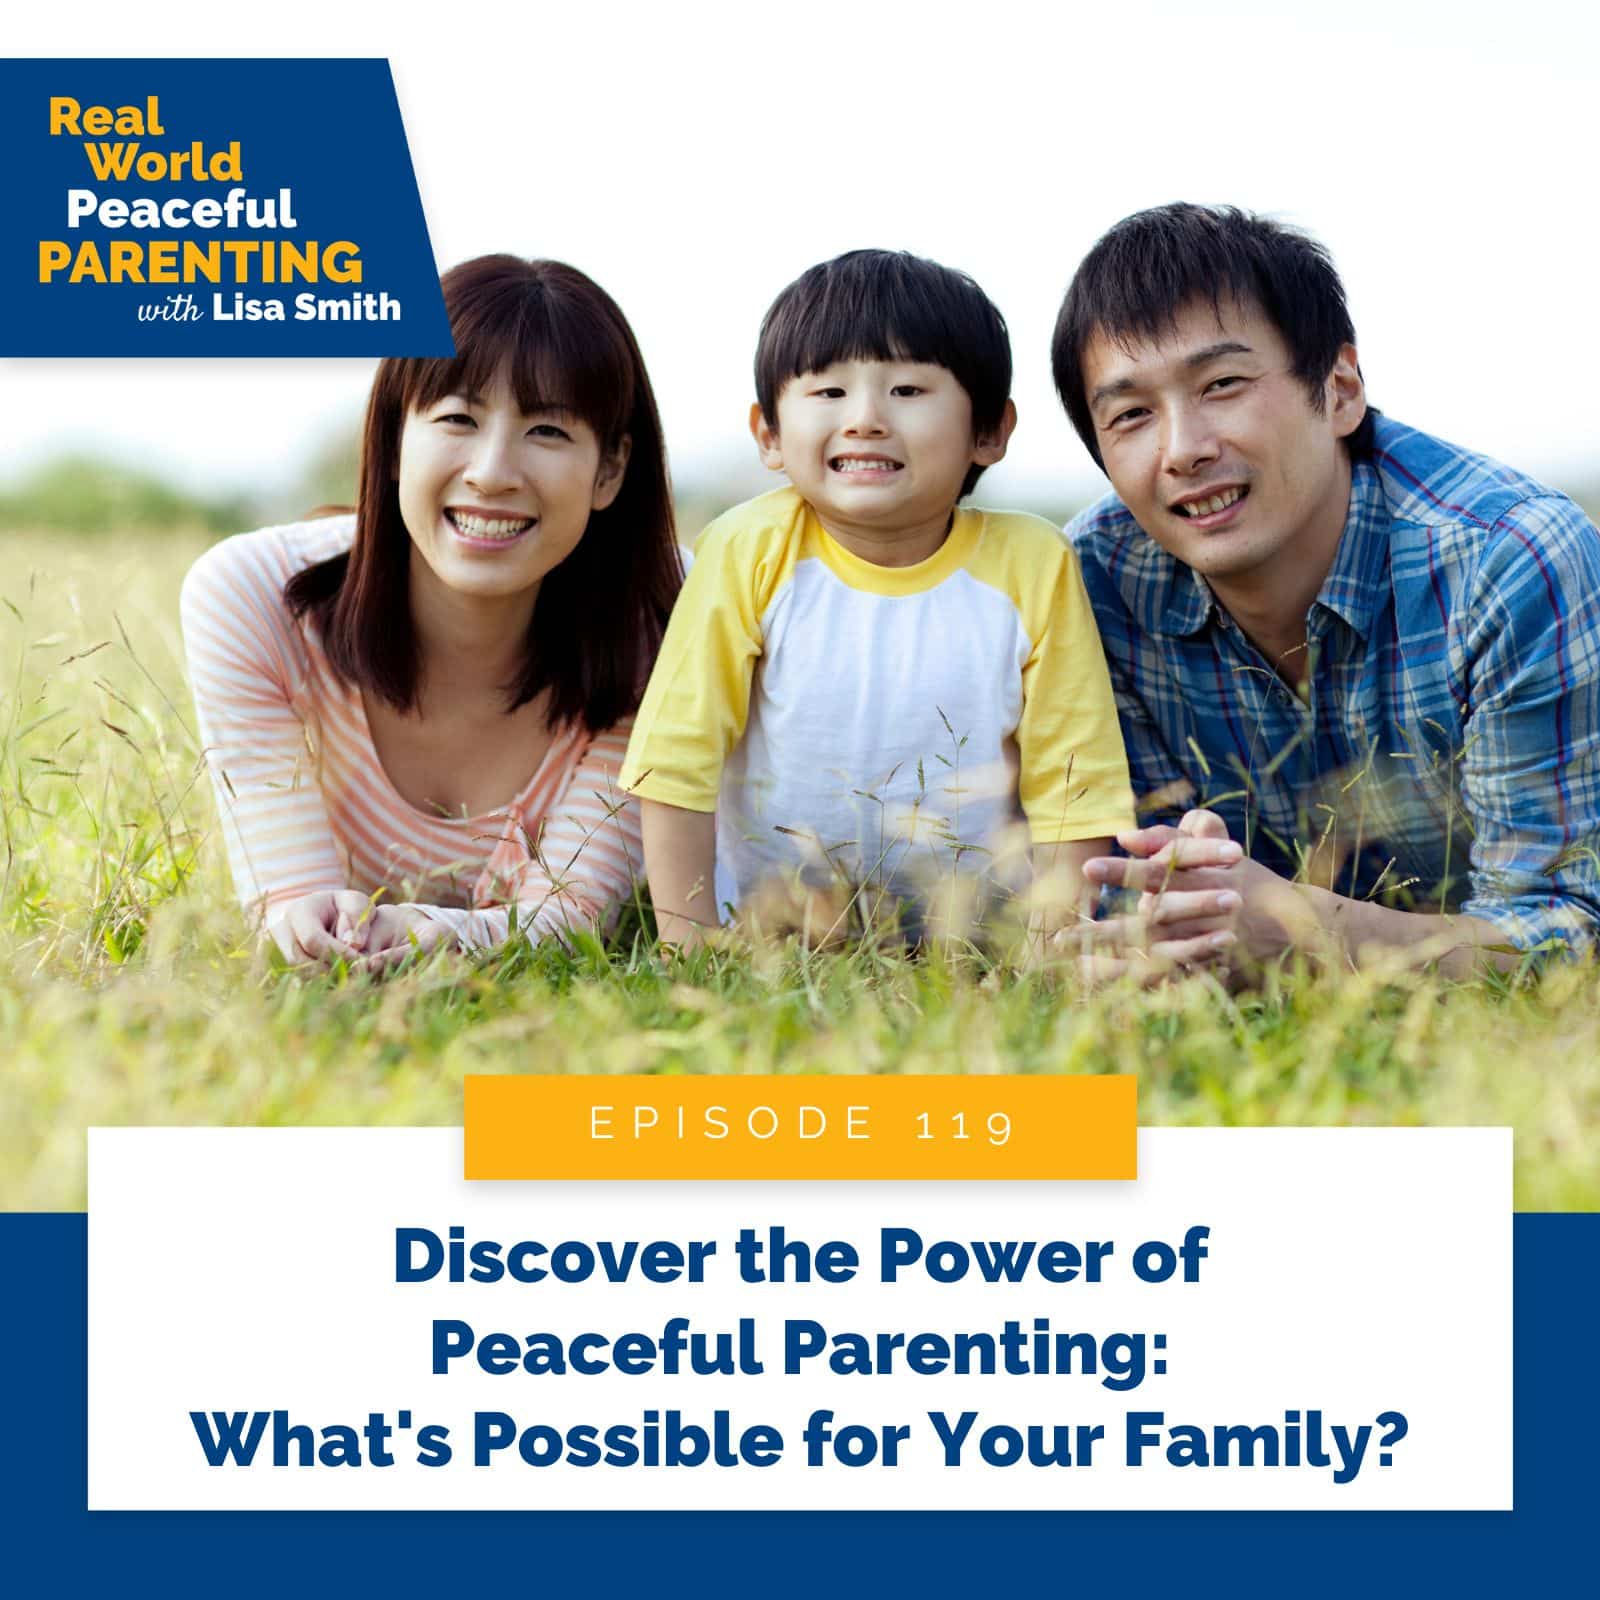 Real World Peaceful Parenting Lisa Smith | Discover the Power of Peaceful Parenting: What's Possible for Your Family?